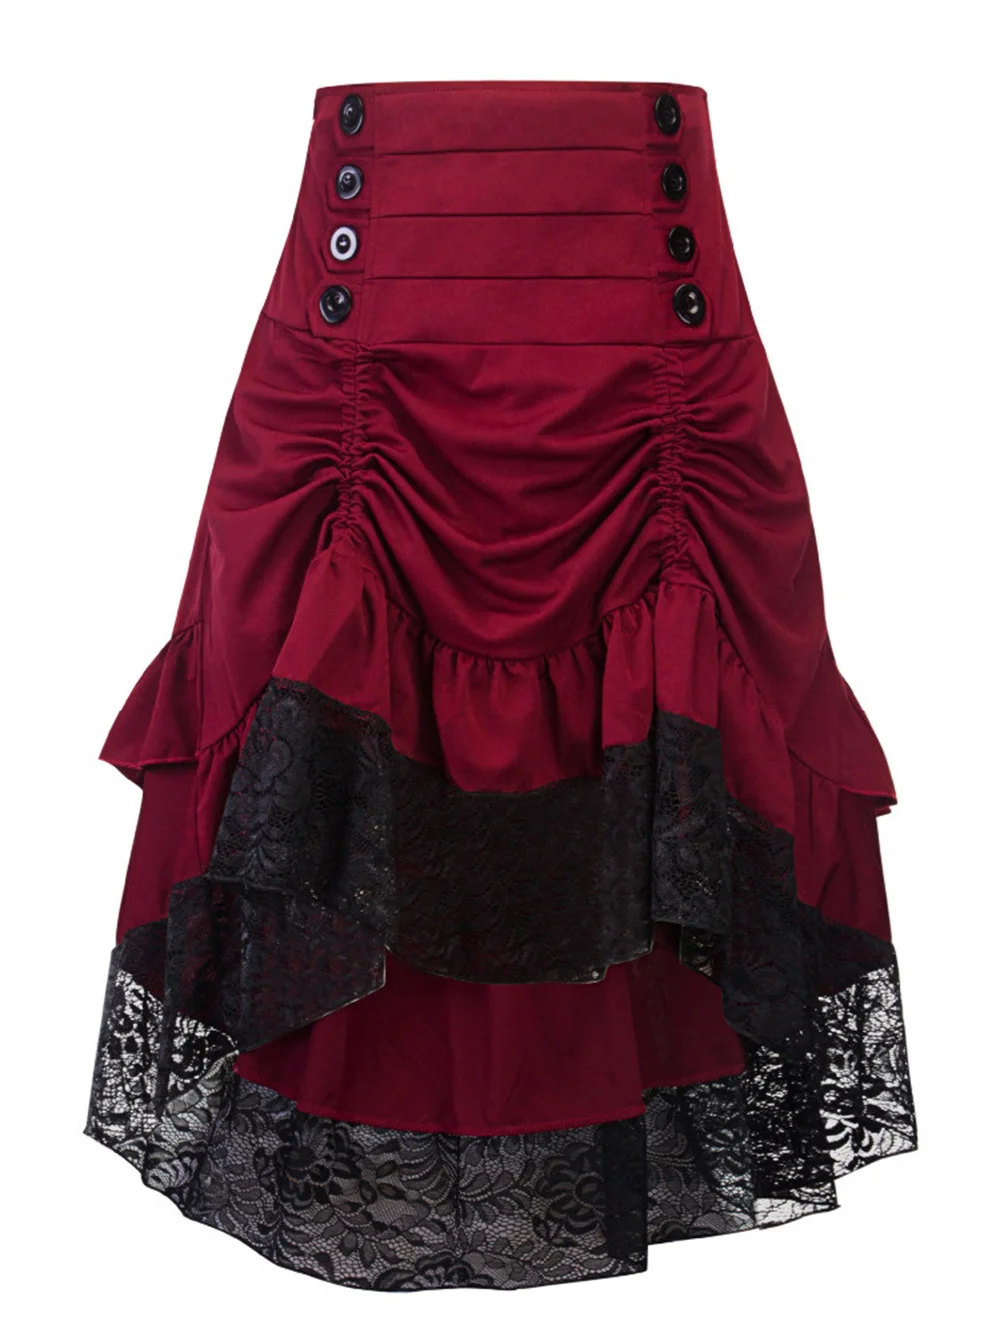 

Costumes Steampunk Gothic Skirt Lace Women Clothing High Low Ruffle Party Lolita Red Medieval Victorian Punk Skater Button Front